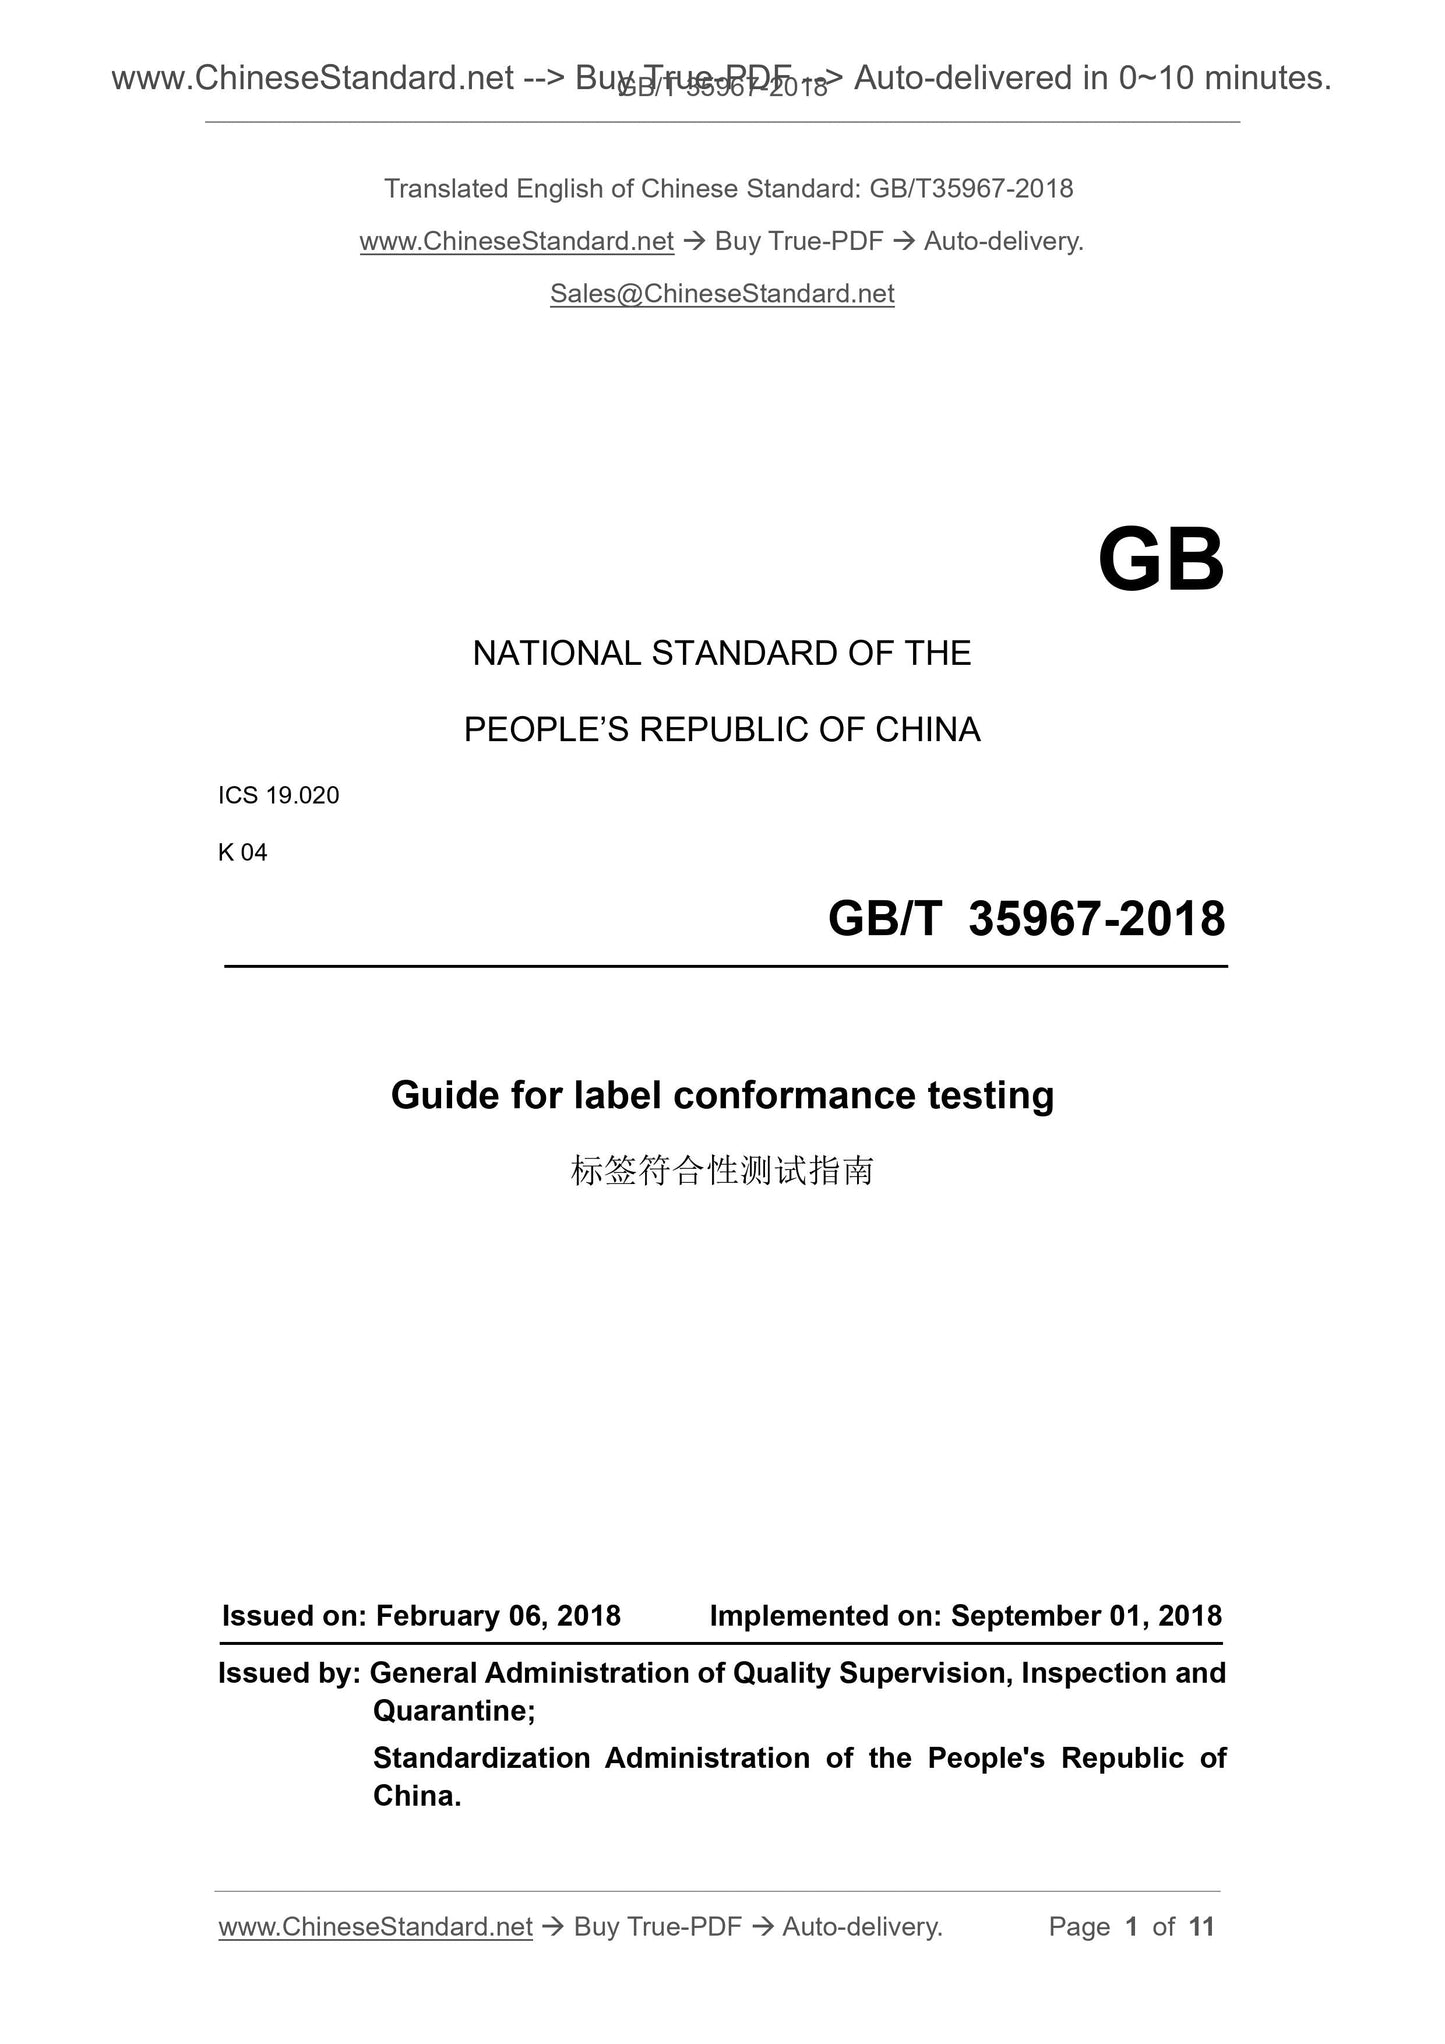 GB/T 35967-2018 Page 1